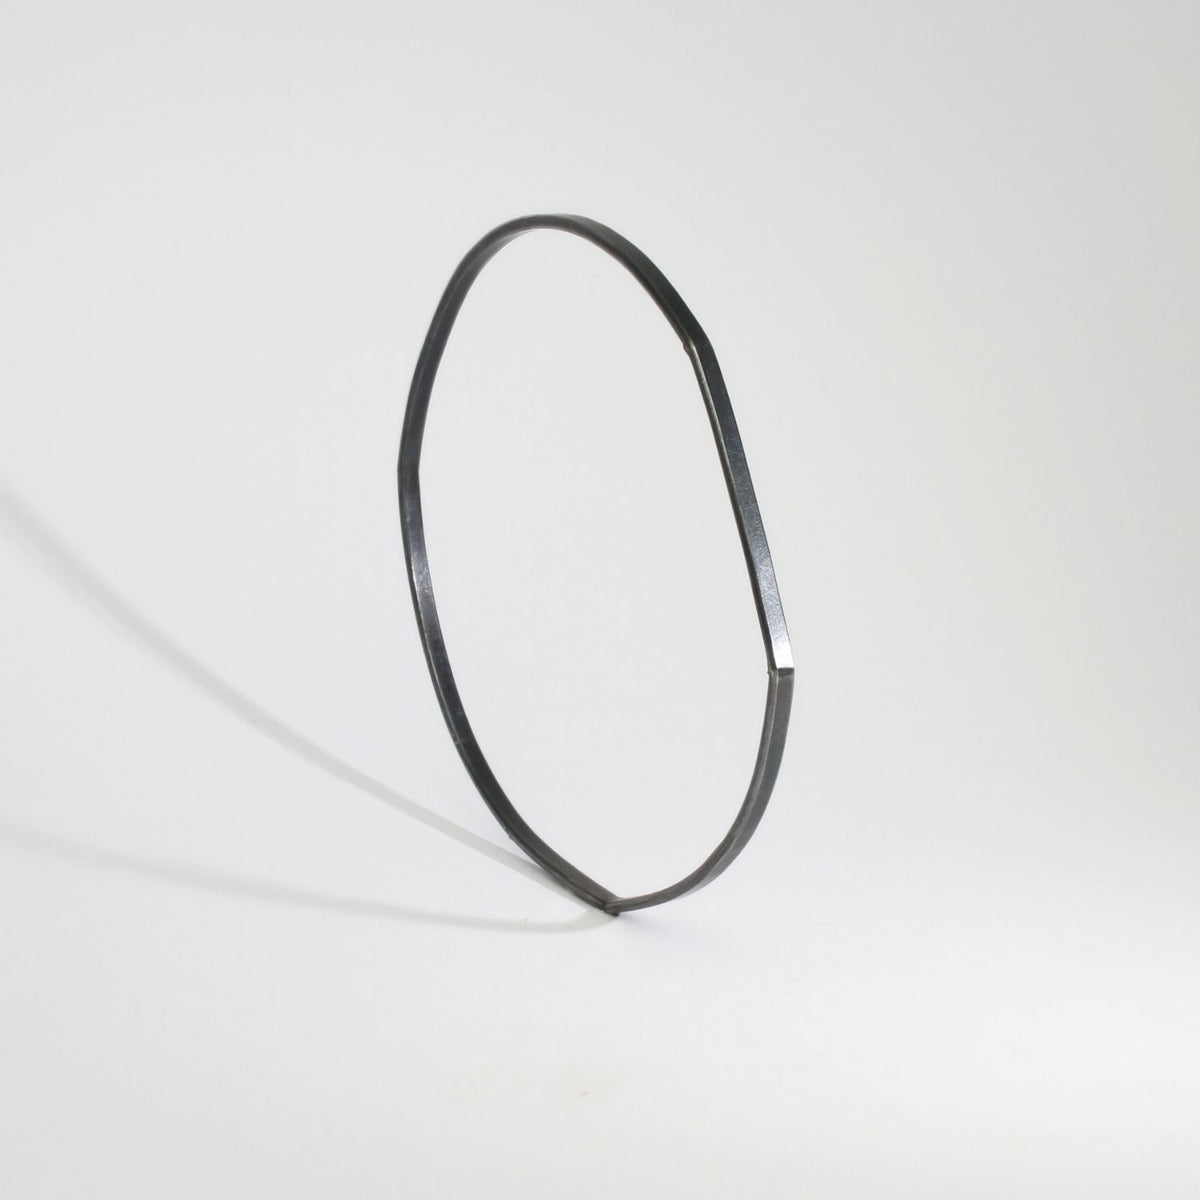 Bangle - Architectural bangle in black silver by Chris Boland